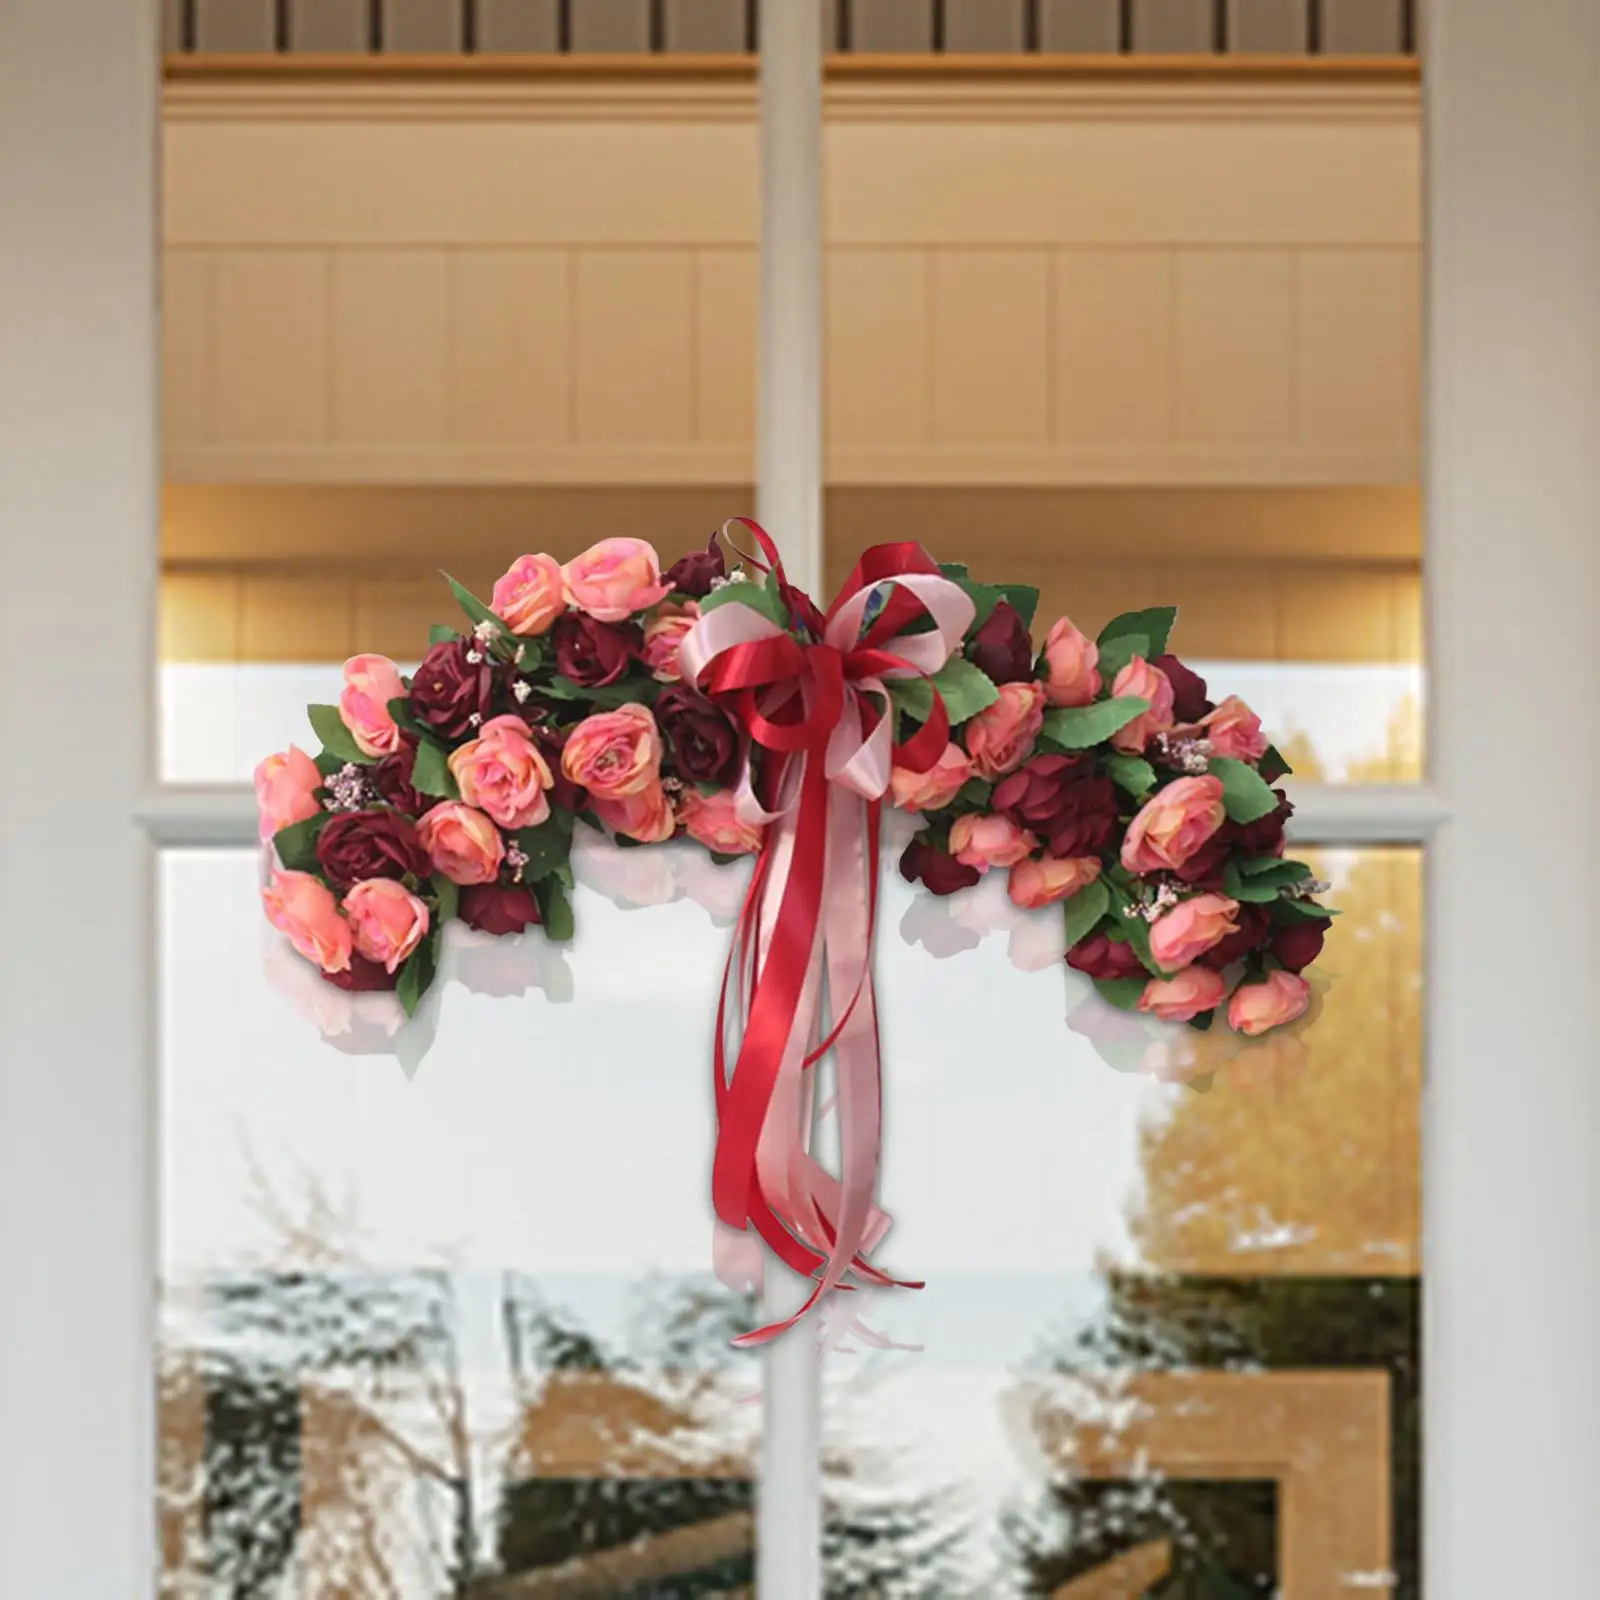 50cm Wedding Arch Flowers Hanging Artificial Rose Floral Swag Garland Door Wreath for Backdrop Party Window Holiday Decor